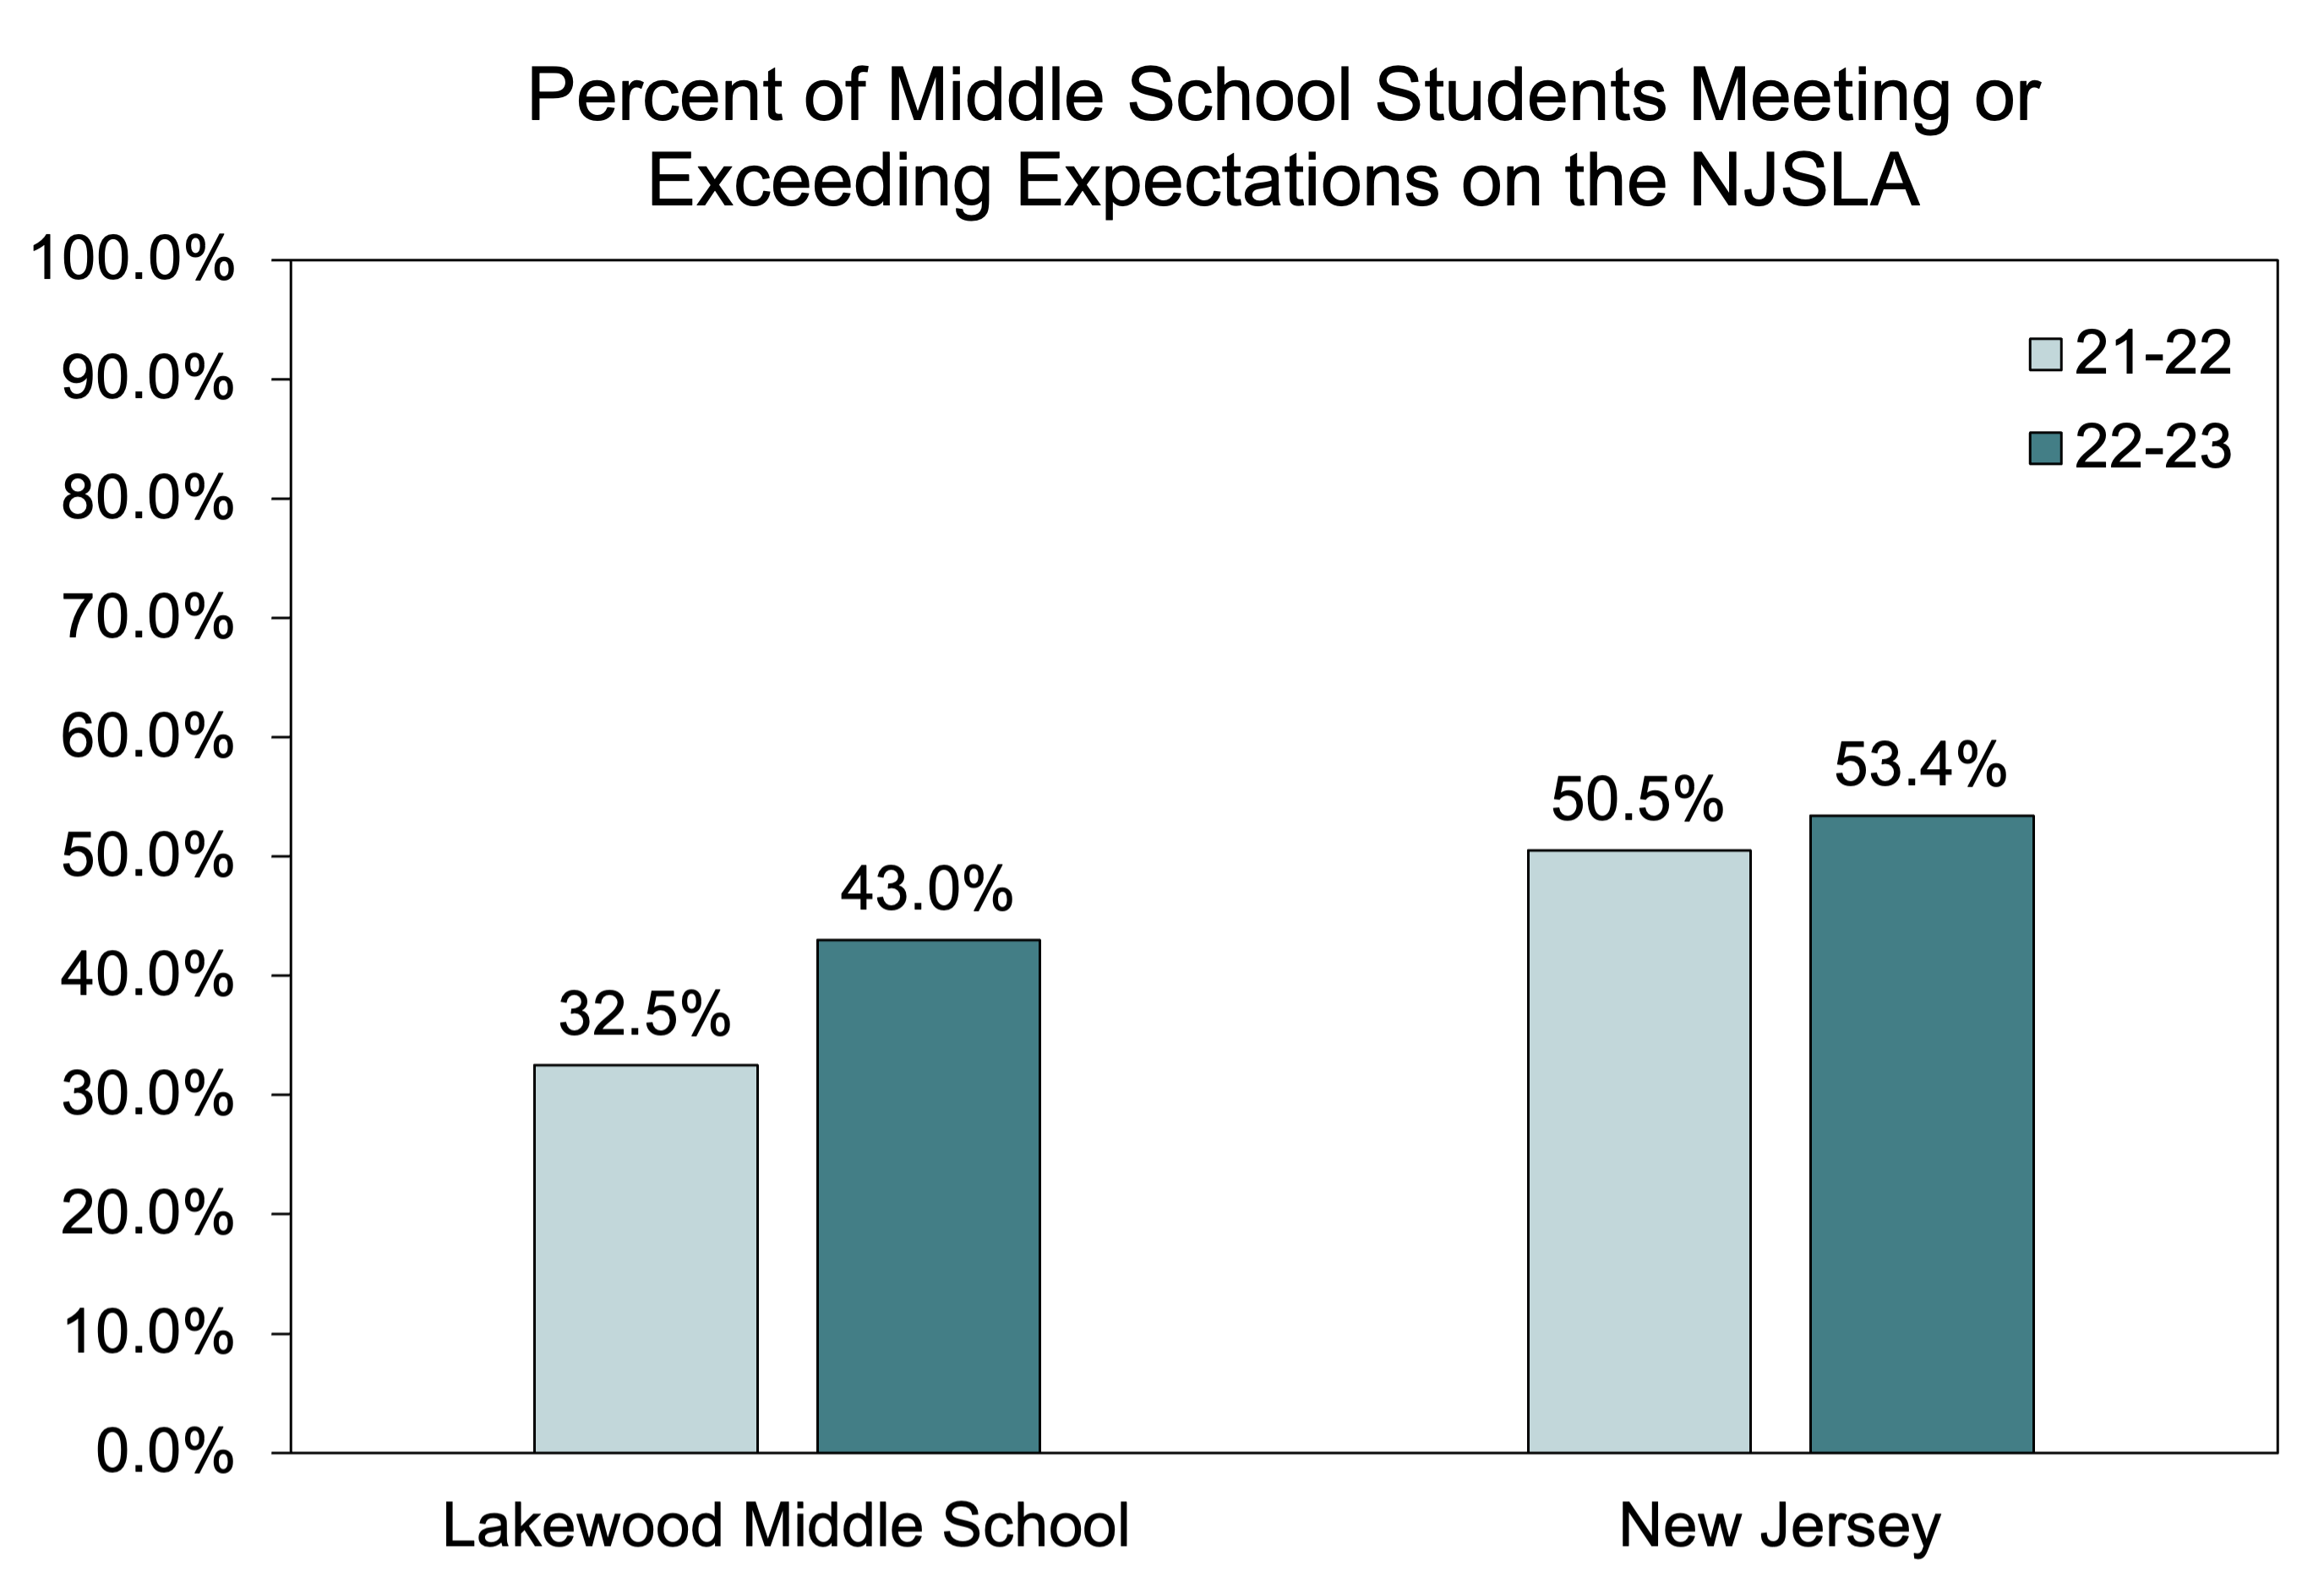 Graph showing the number of Lakewood Middle School students who met or exceeded expectations on the NJSLA was 10.5 percentage points higher in 2022-2023 than 2021-2022.